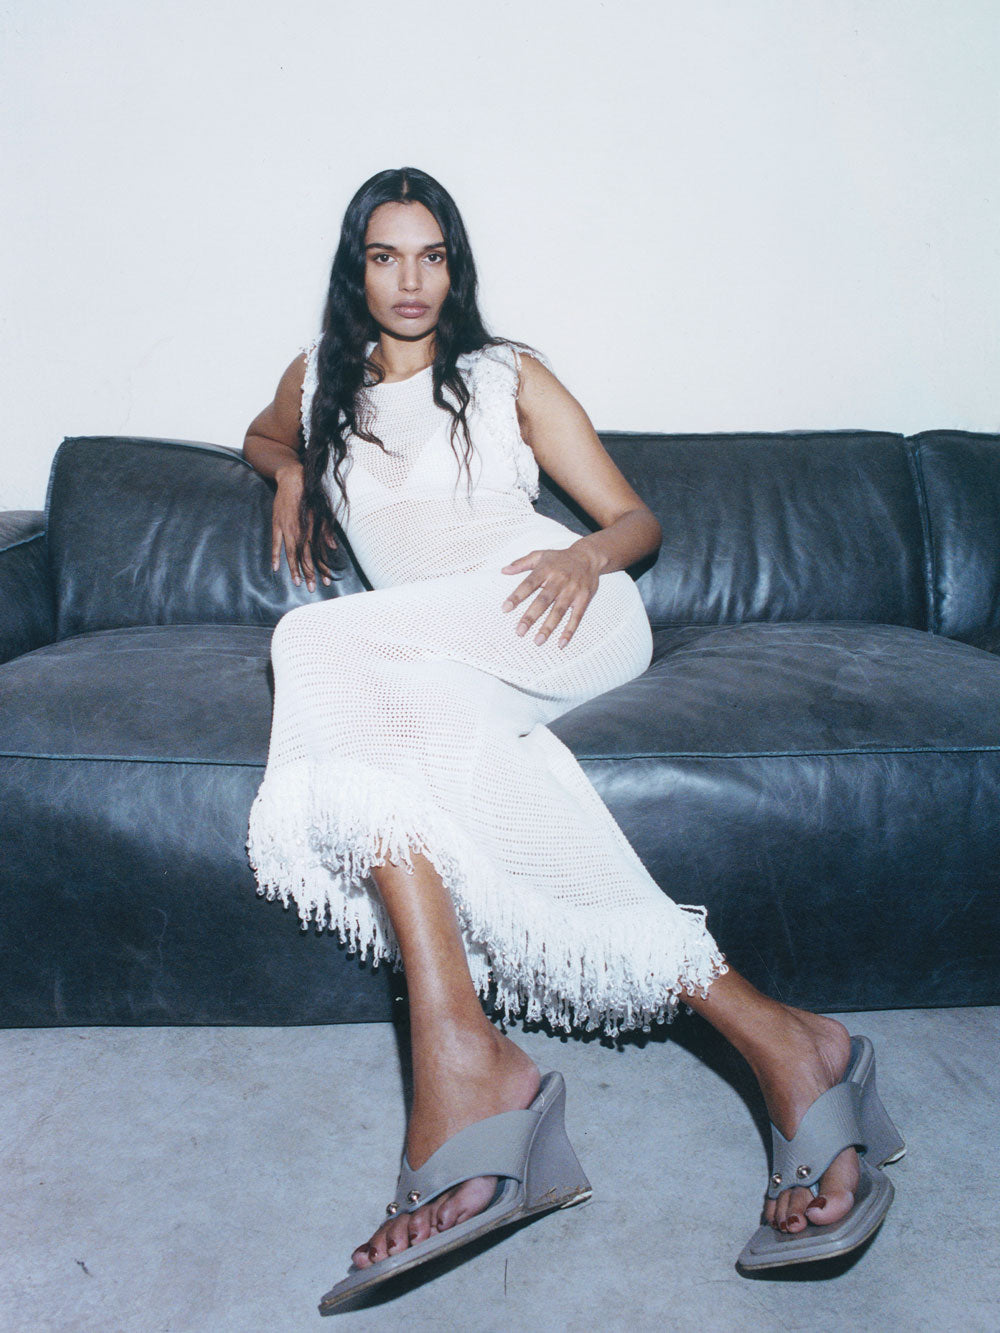 A model relaxing on a dark couch wearing the 08 Fringe Dress in white